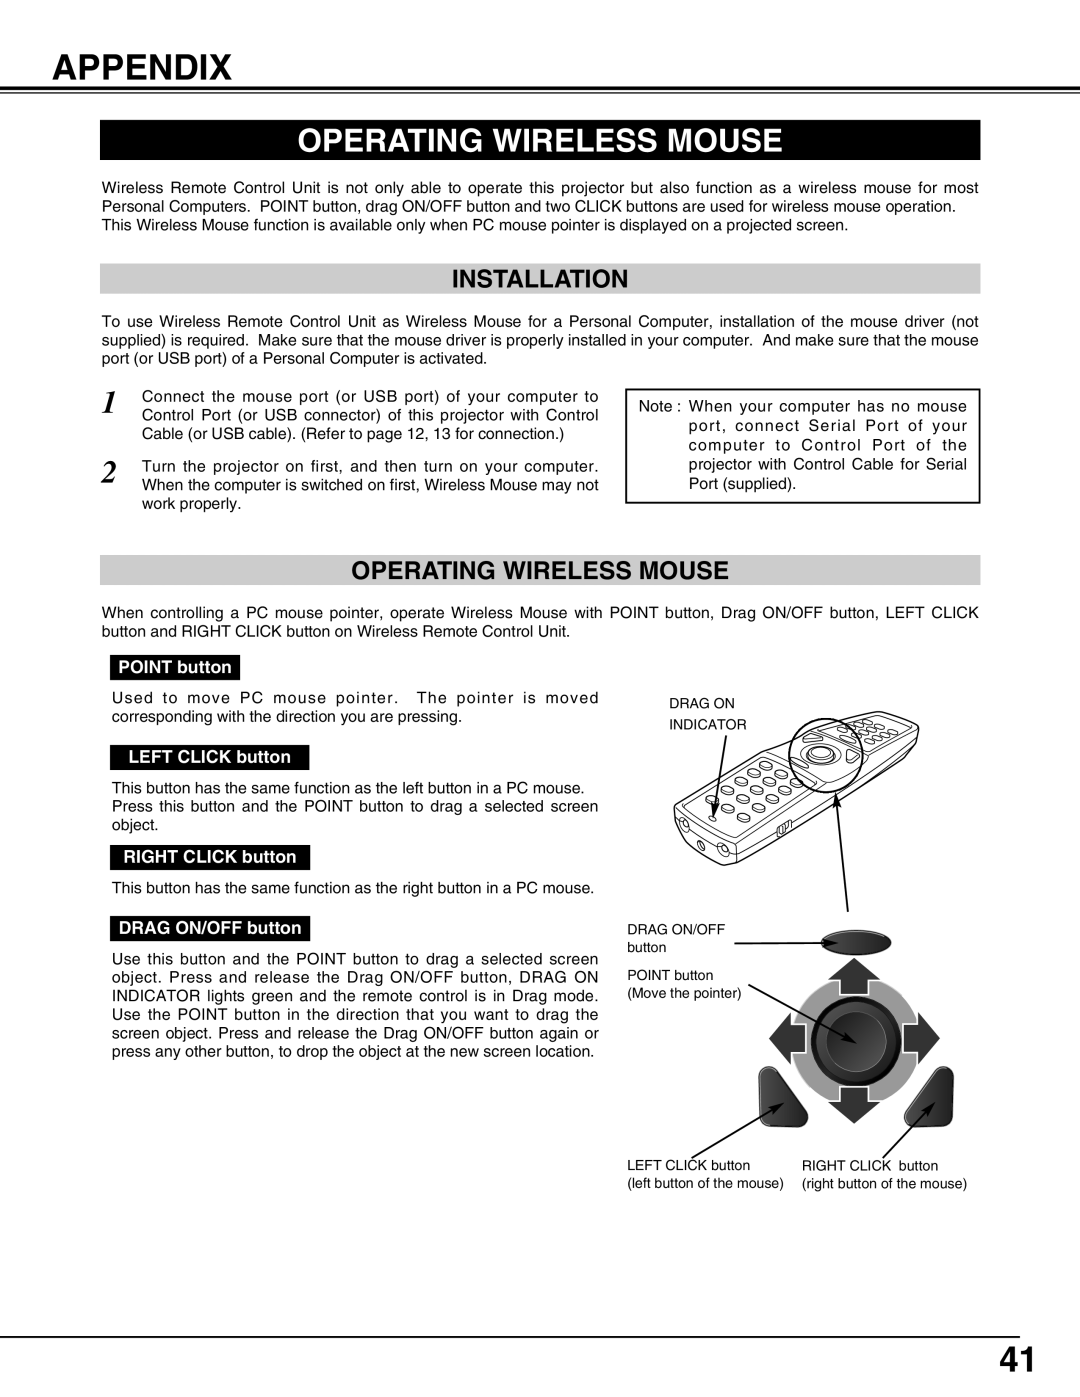 Eiki LC-X60 instruction manual Appendix, Operating Wireless Mouse, Installation 